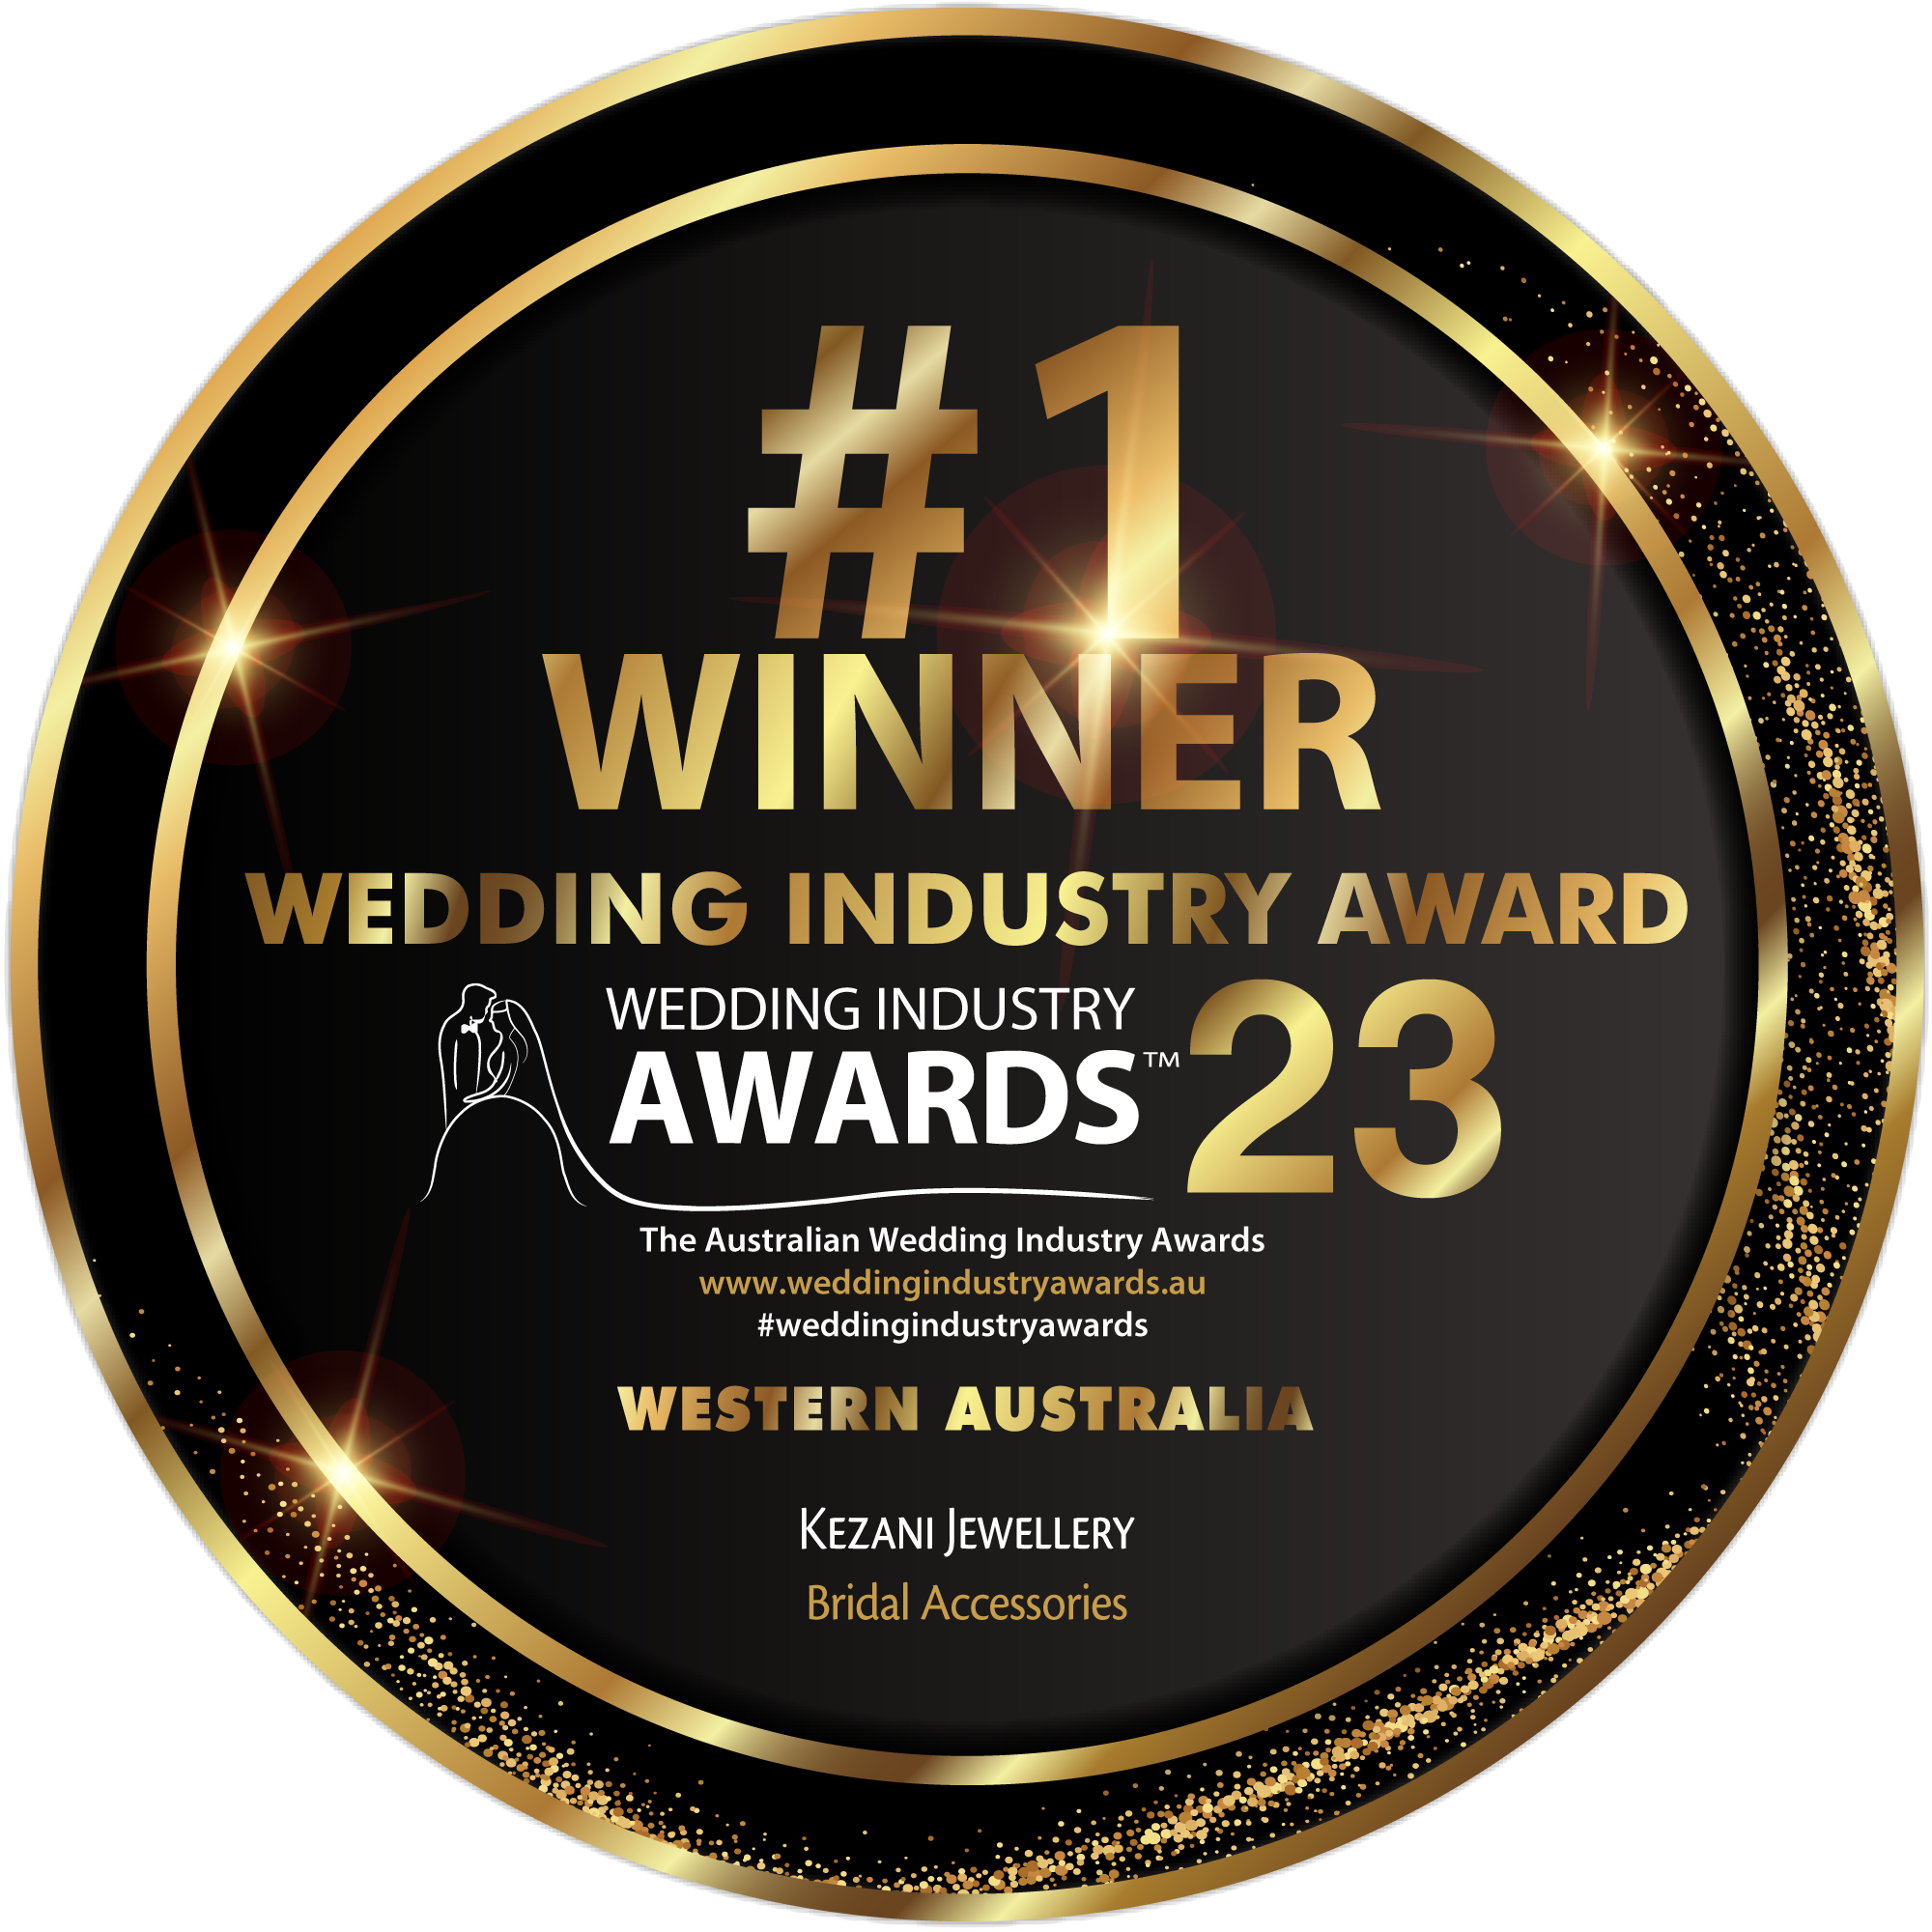 This is an Award from Wedding Industry Award to Kezani Jewellery as the winner of 2023 for Bridal Accessories